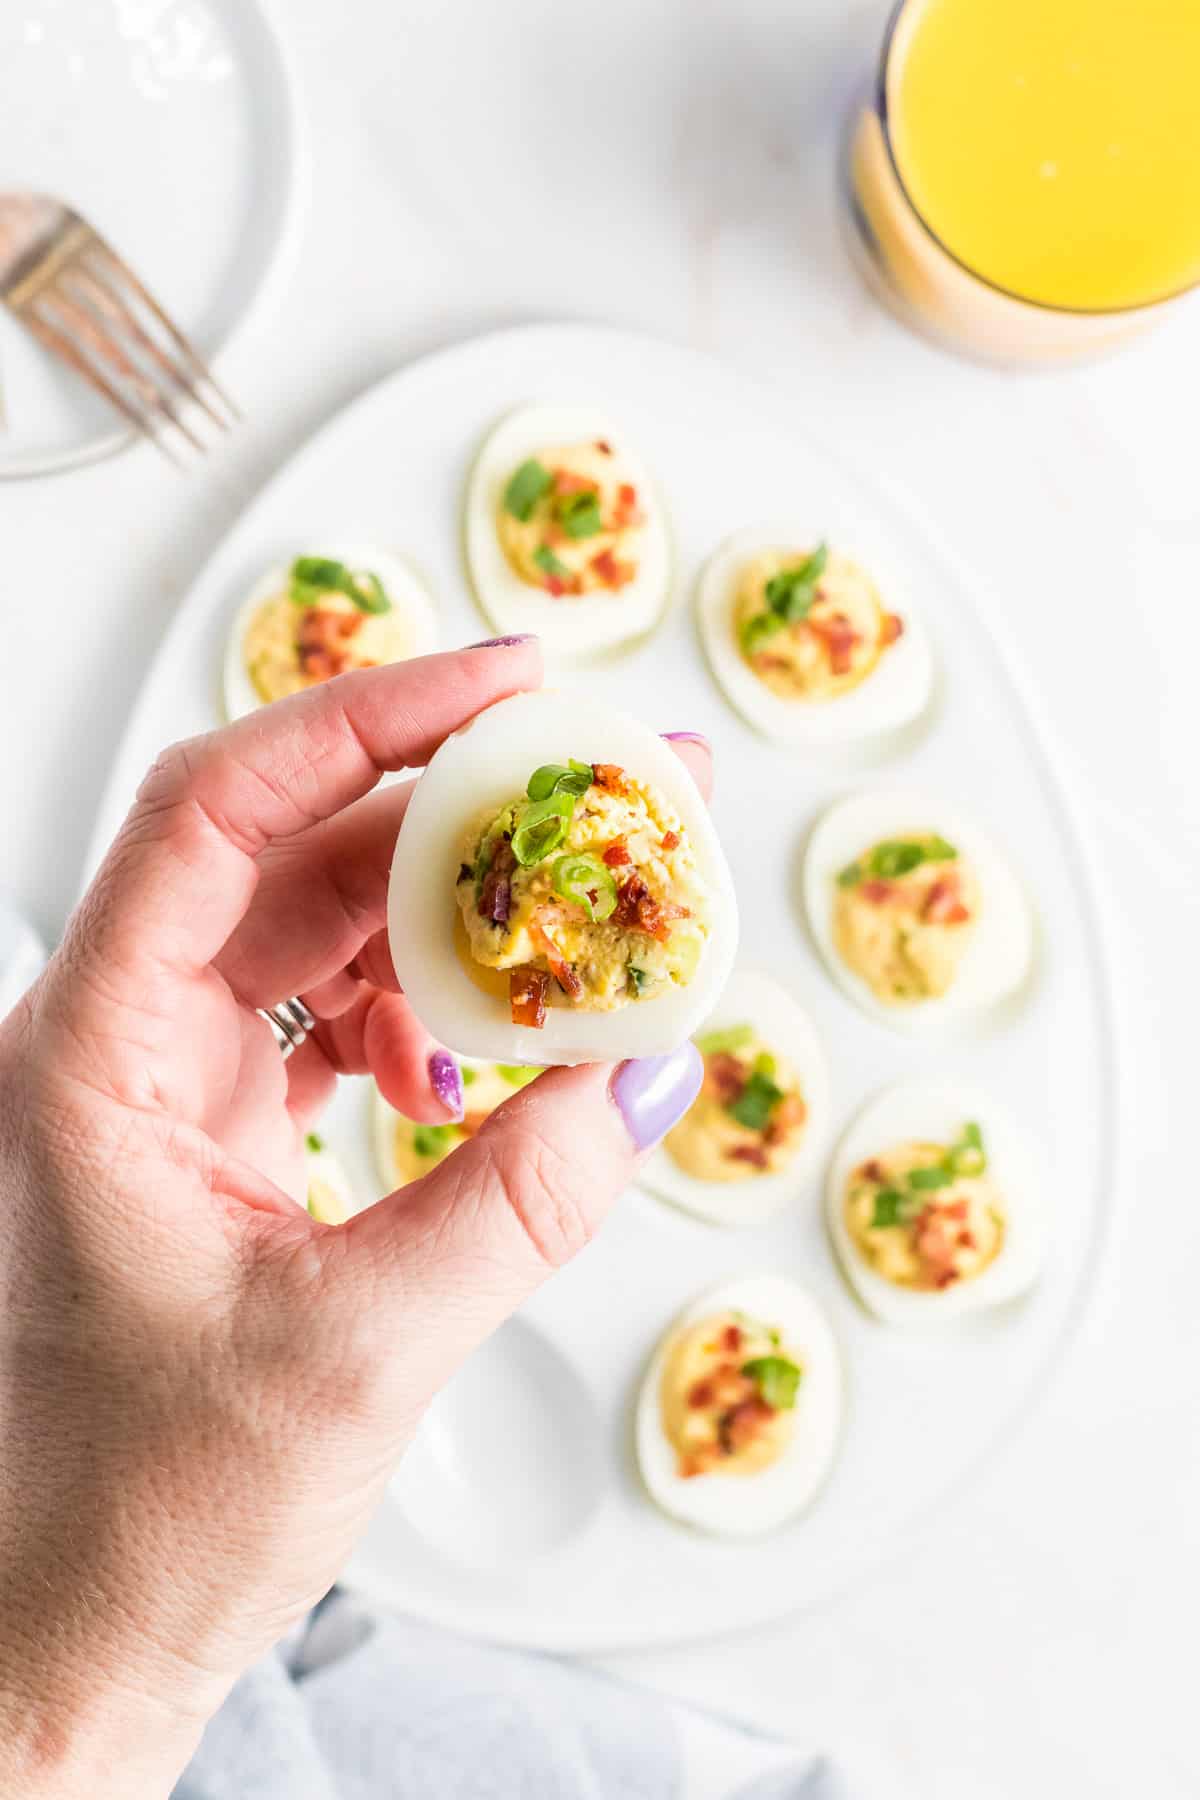 A hand holding up a deviled egg with bacon and green onions.